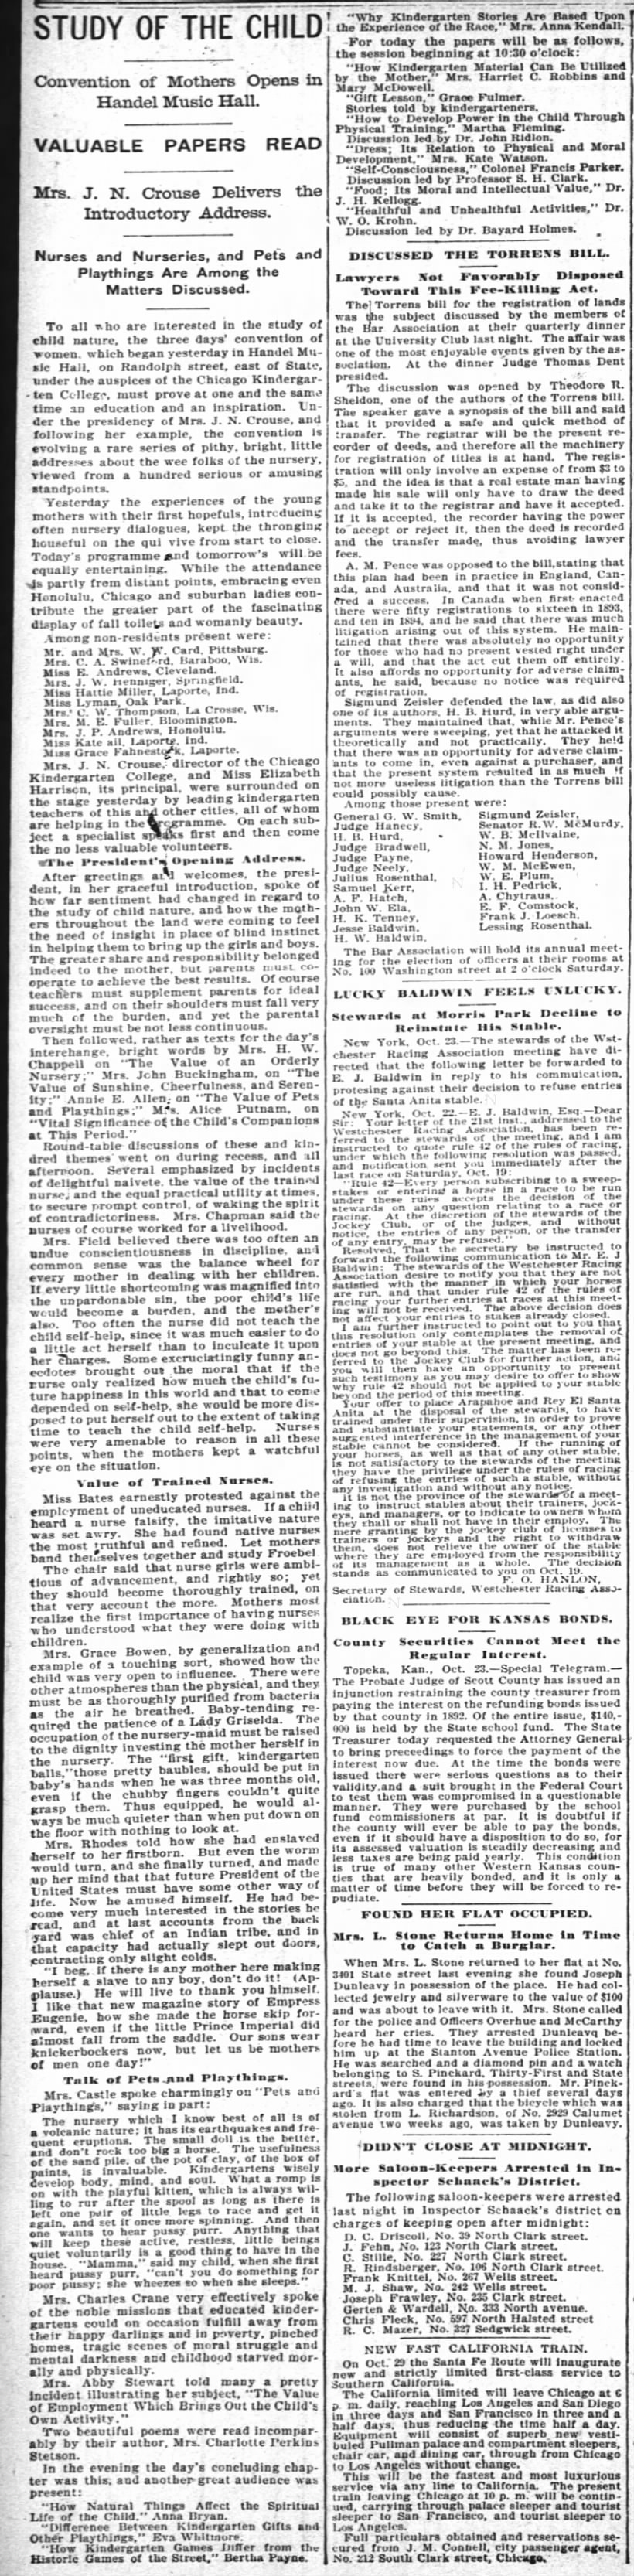 page 5 The Inter Ocean (Chicago, IL) 24 October 1895